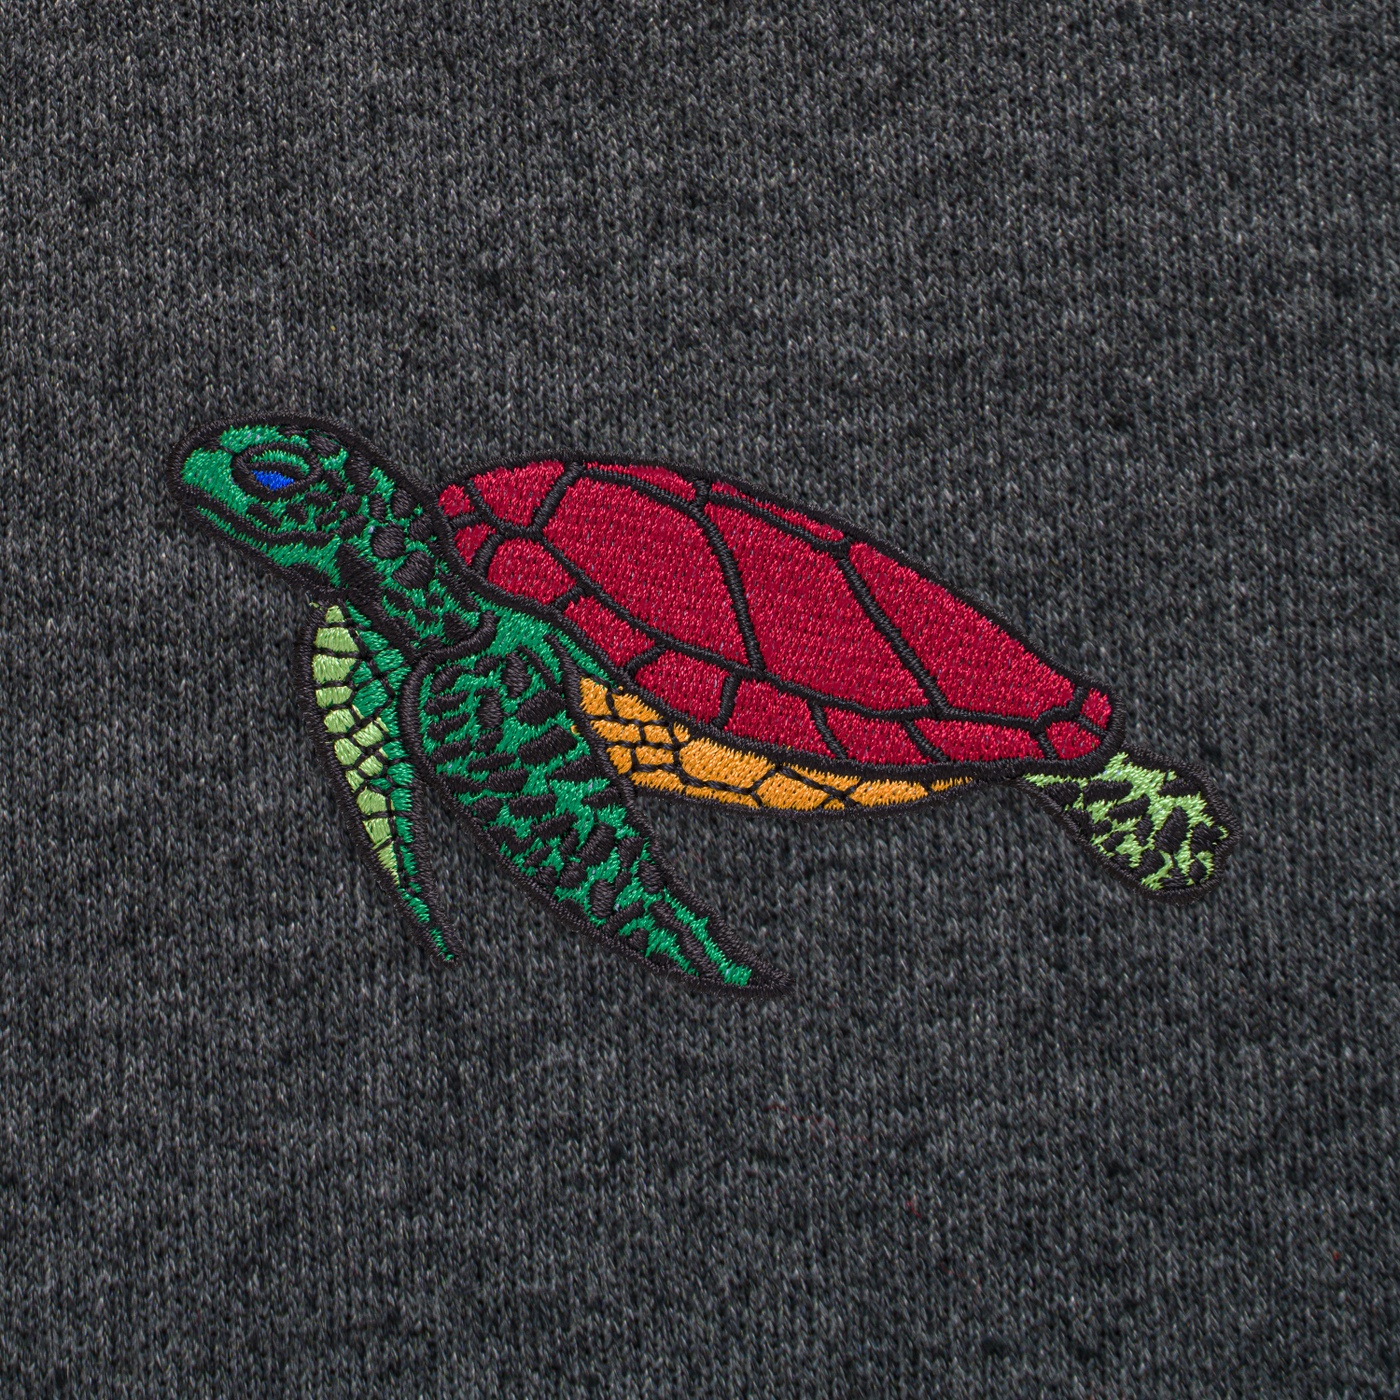 Bobby's Planet Men's Embroidered Sea Turtle Sweatshirt from Seven Seas Fish Animals Collection in Dark Grey Heather Color#color_dark-grey-heather